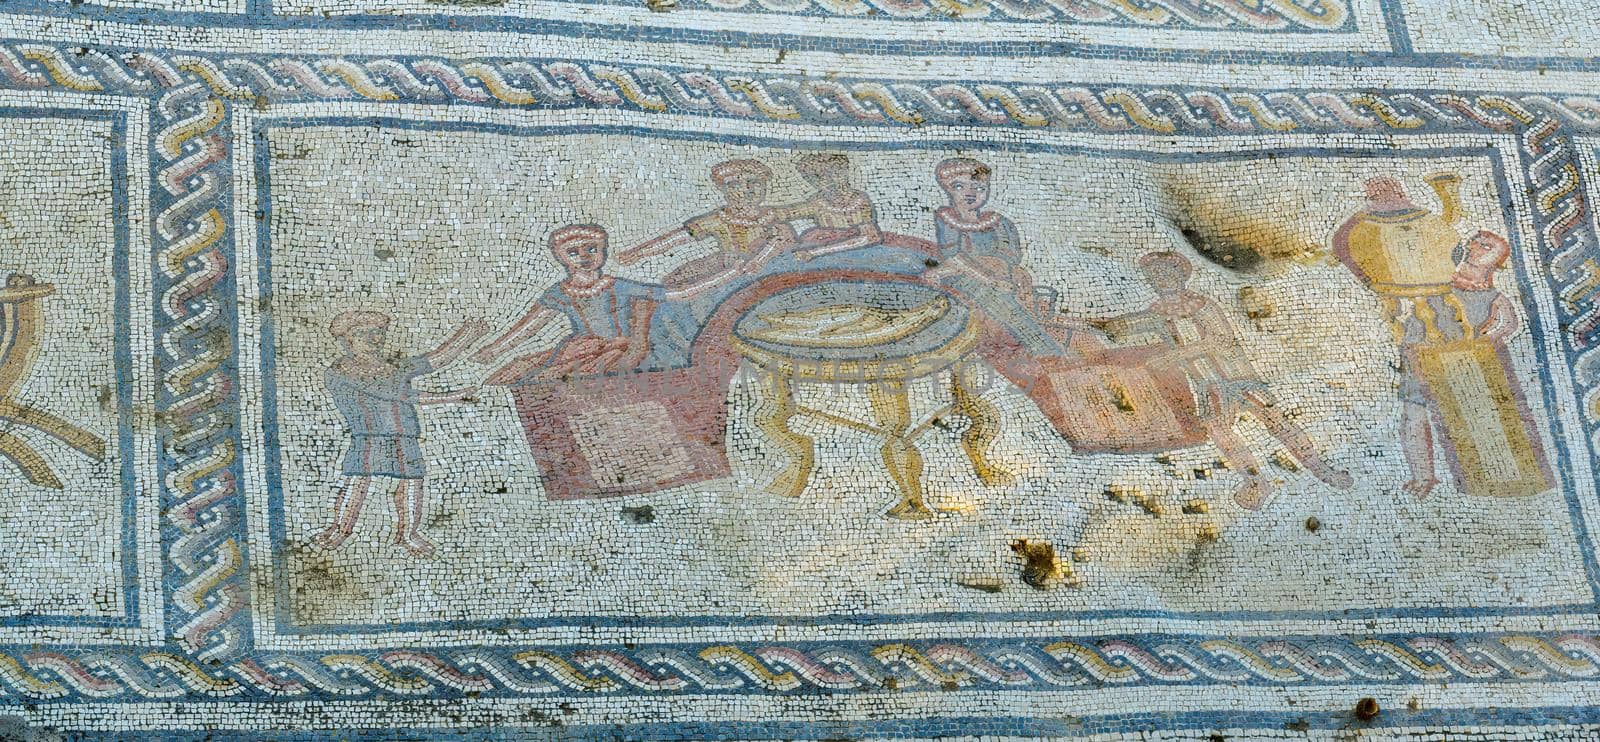 Tzipori, Israel - March 29, 2021: View of a Roman era mosaic floor of a public house, in Tzipori National Park, Northern Israel